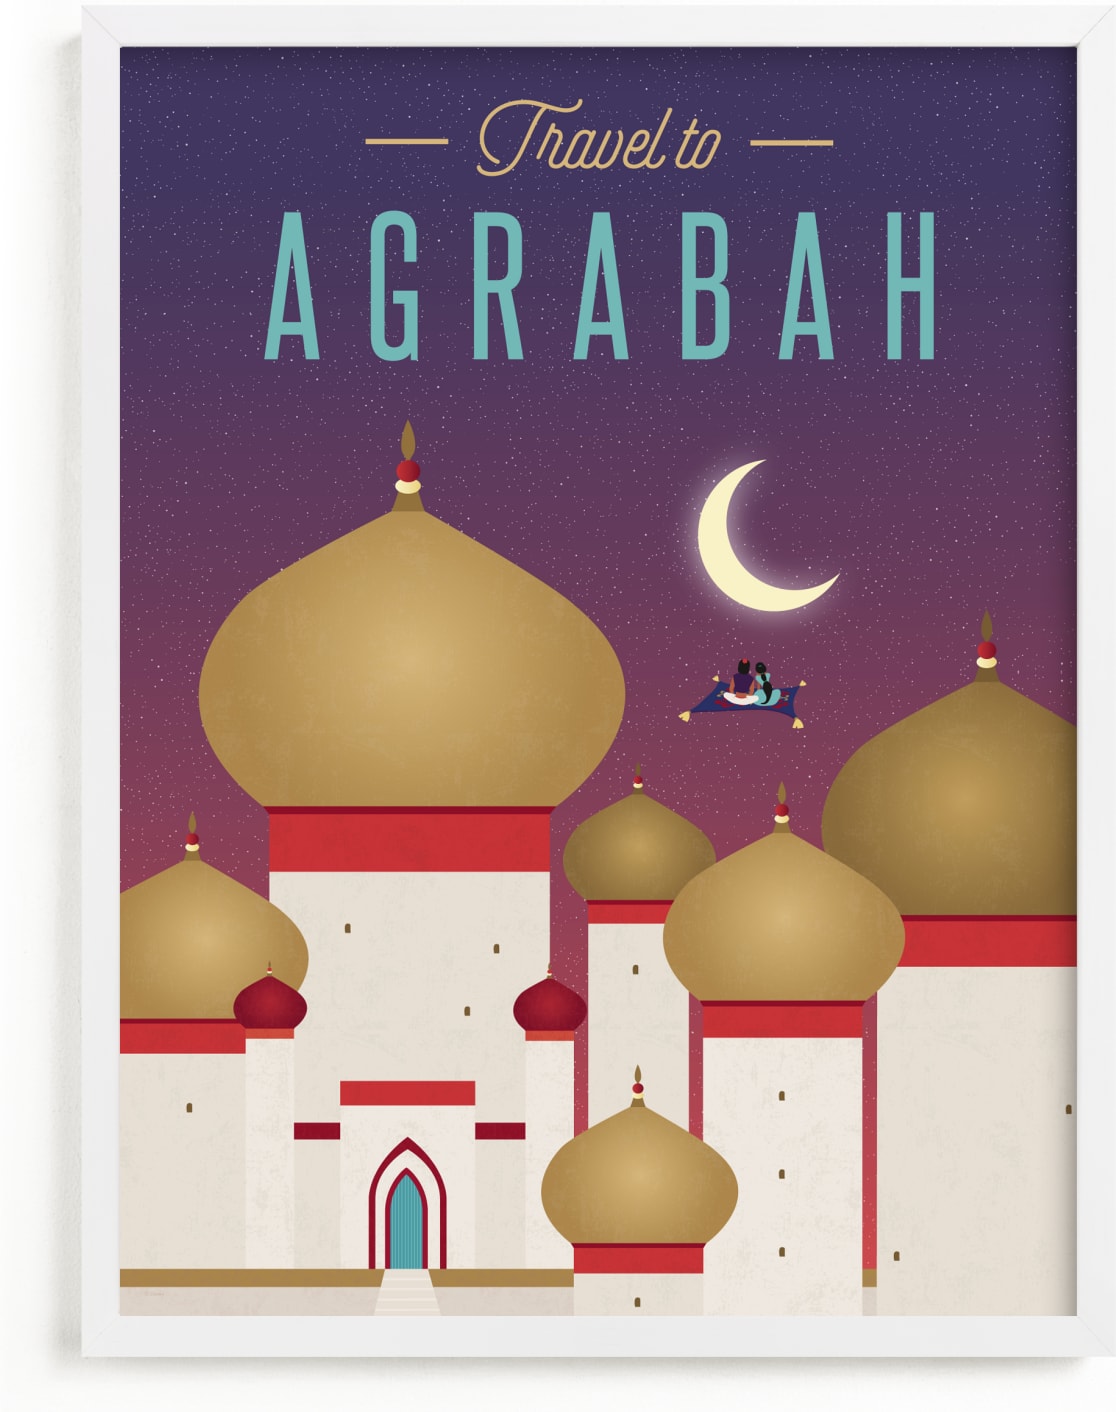 This is a colorful disney art by Erica Krystek called Travel to Disney's Agrabah.